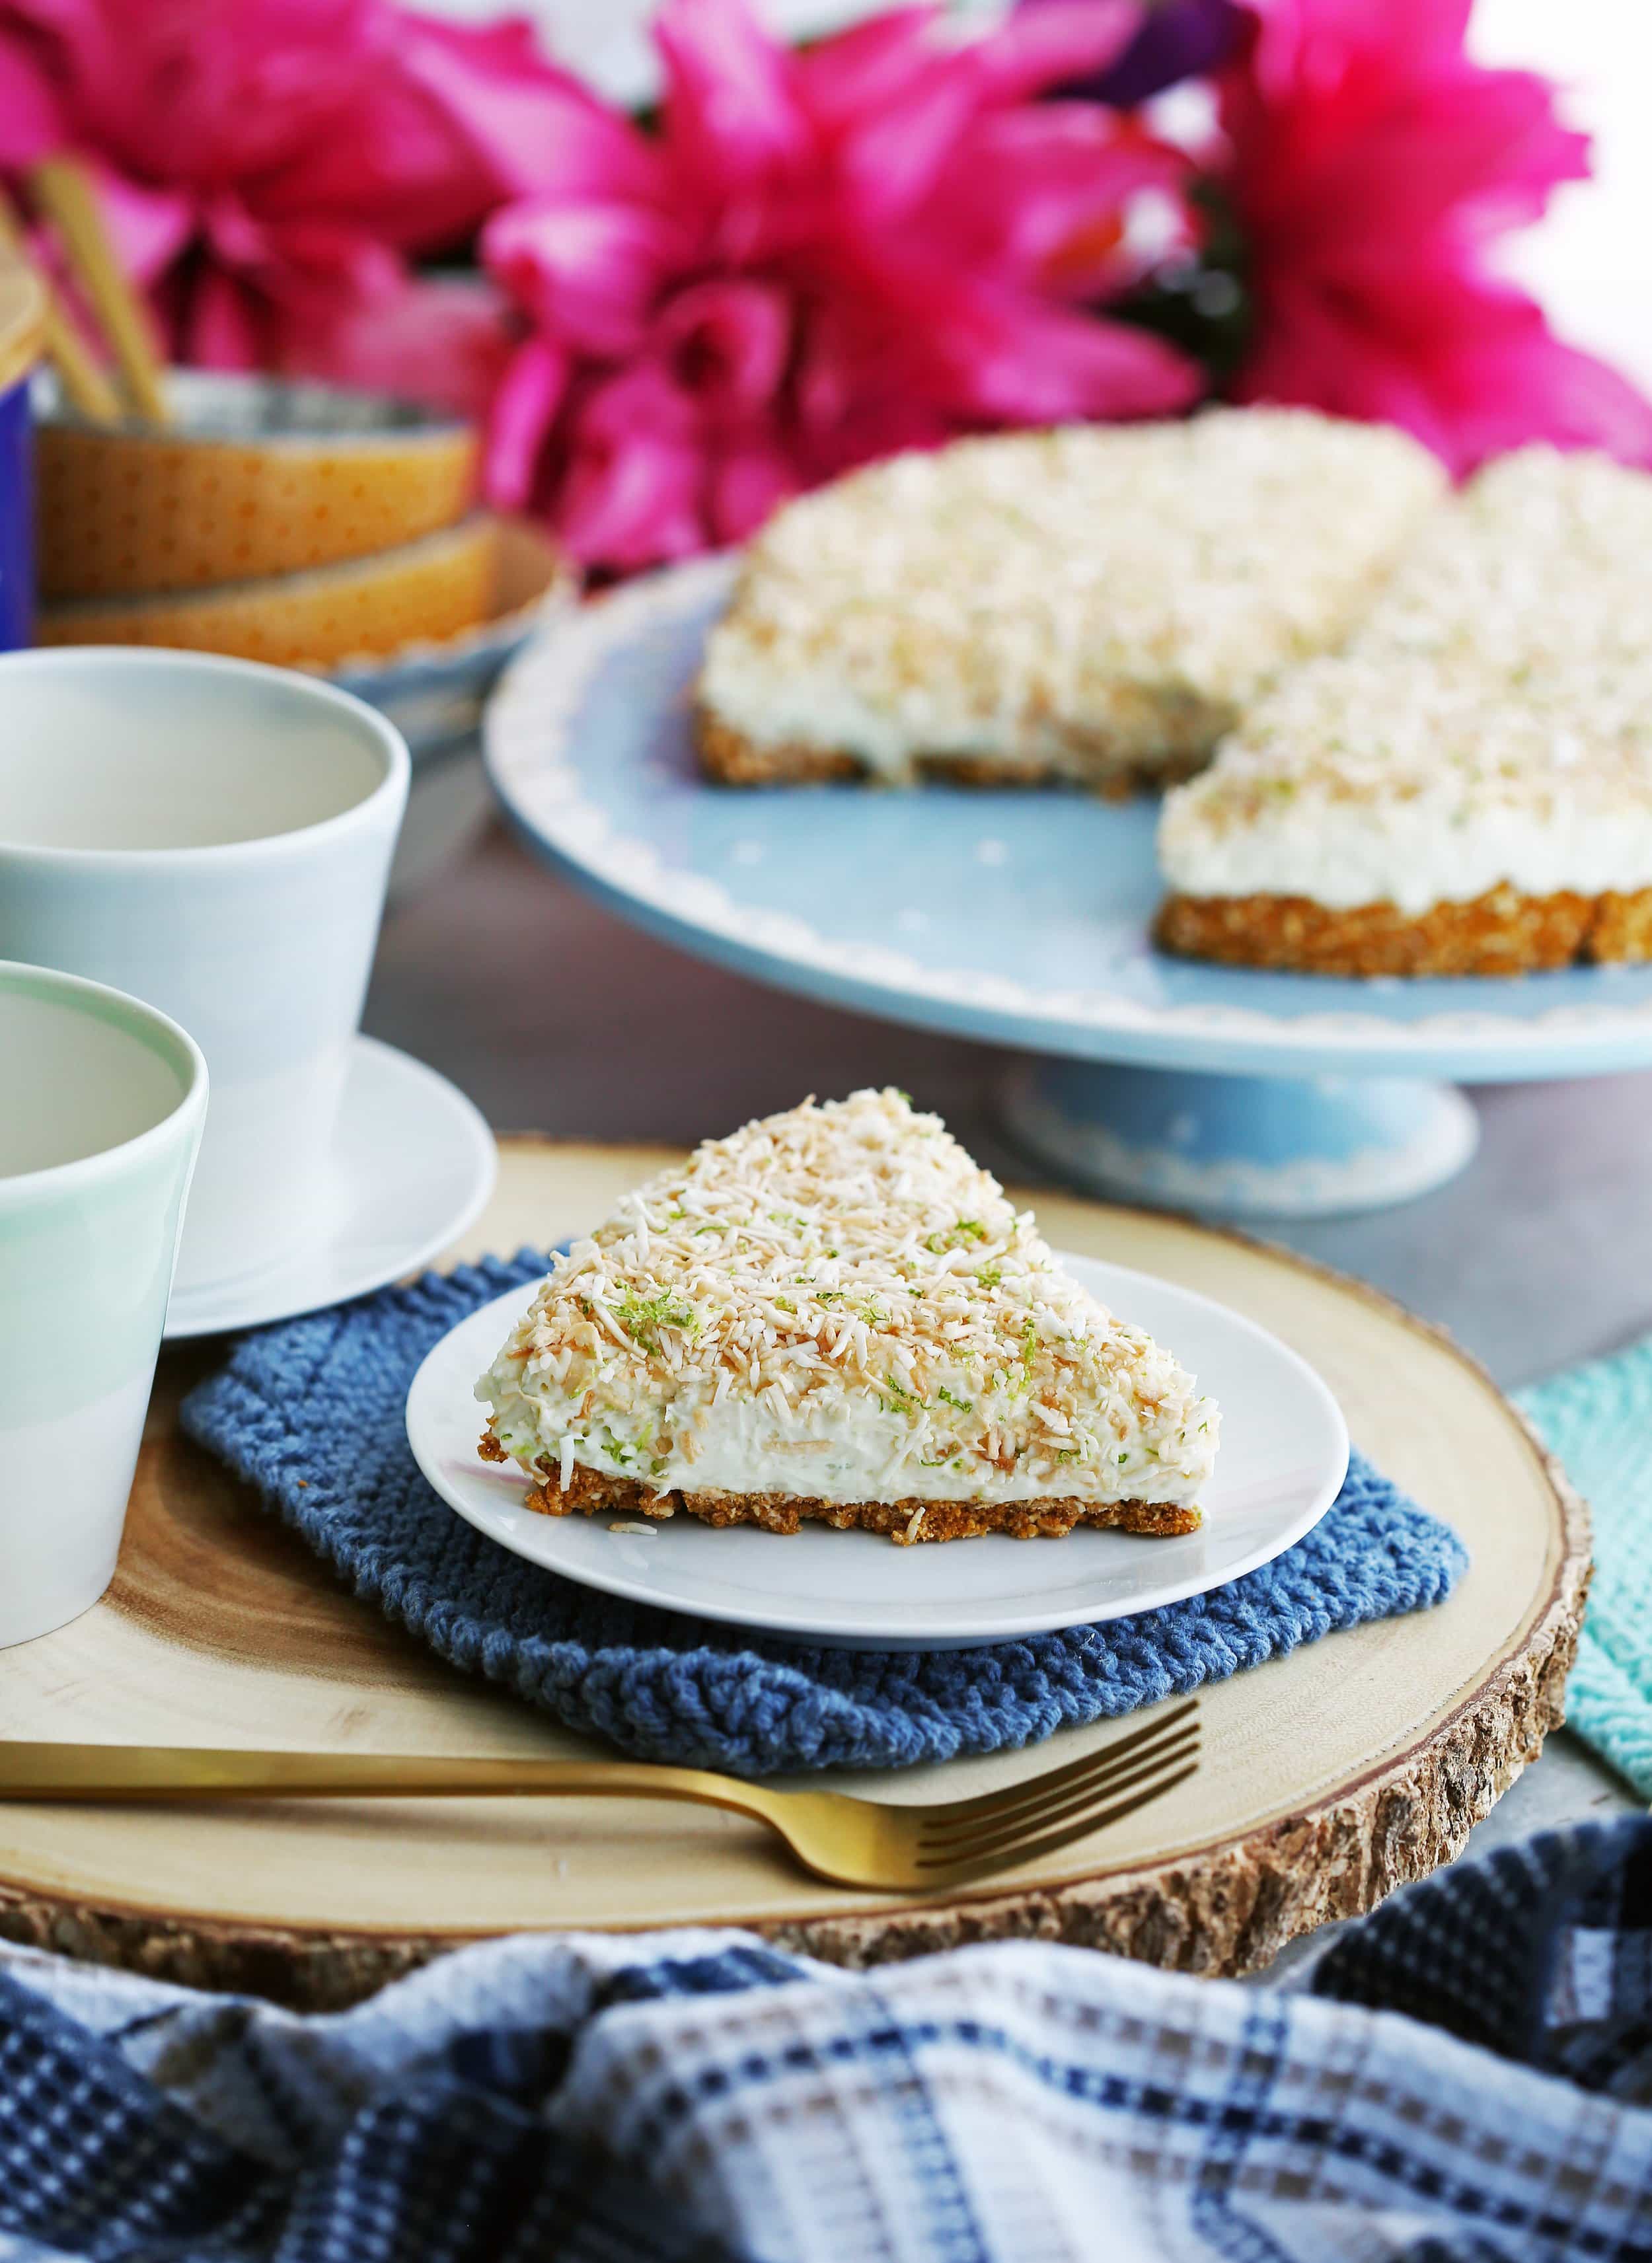 A slice of no-bake coconut lime mascarpone cheesecake on a white plate with more cheesecake on a cake platter behind it.